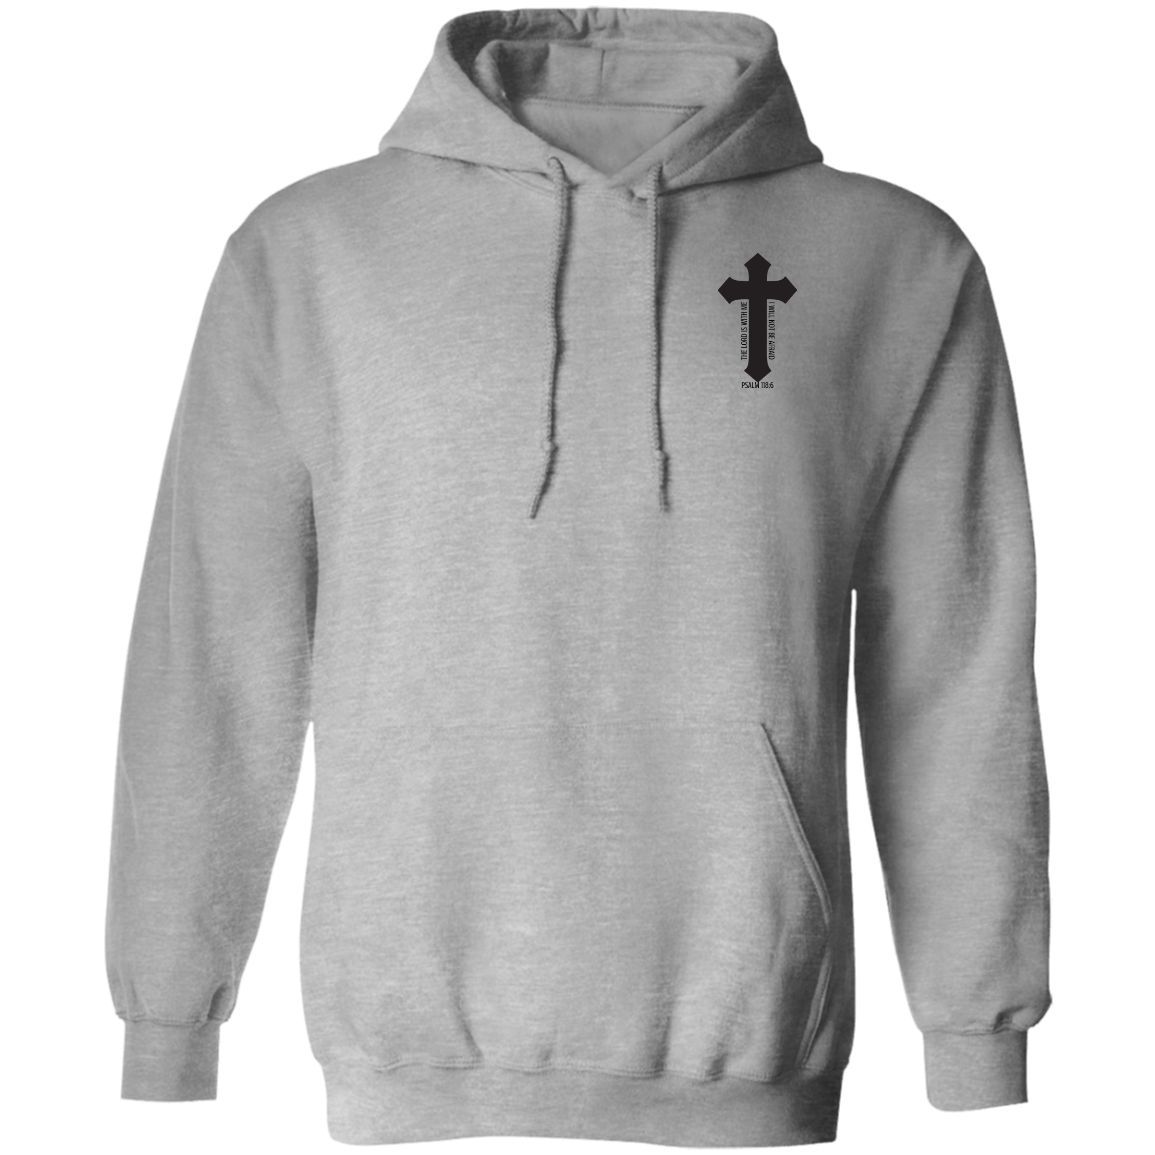 God's Got My Back- Pullover Hoodie